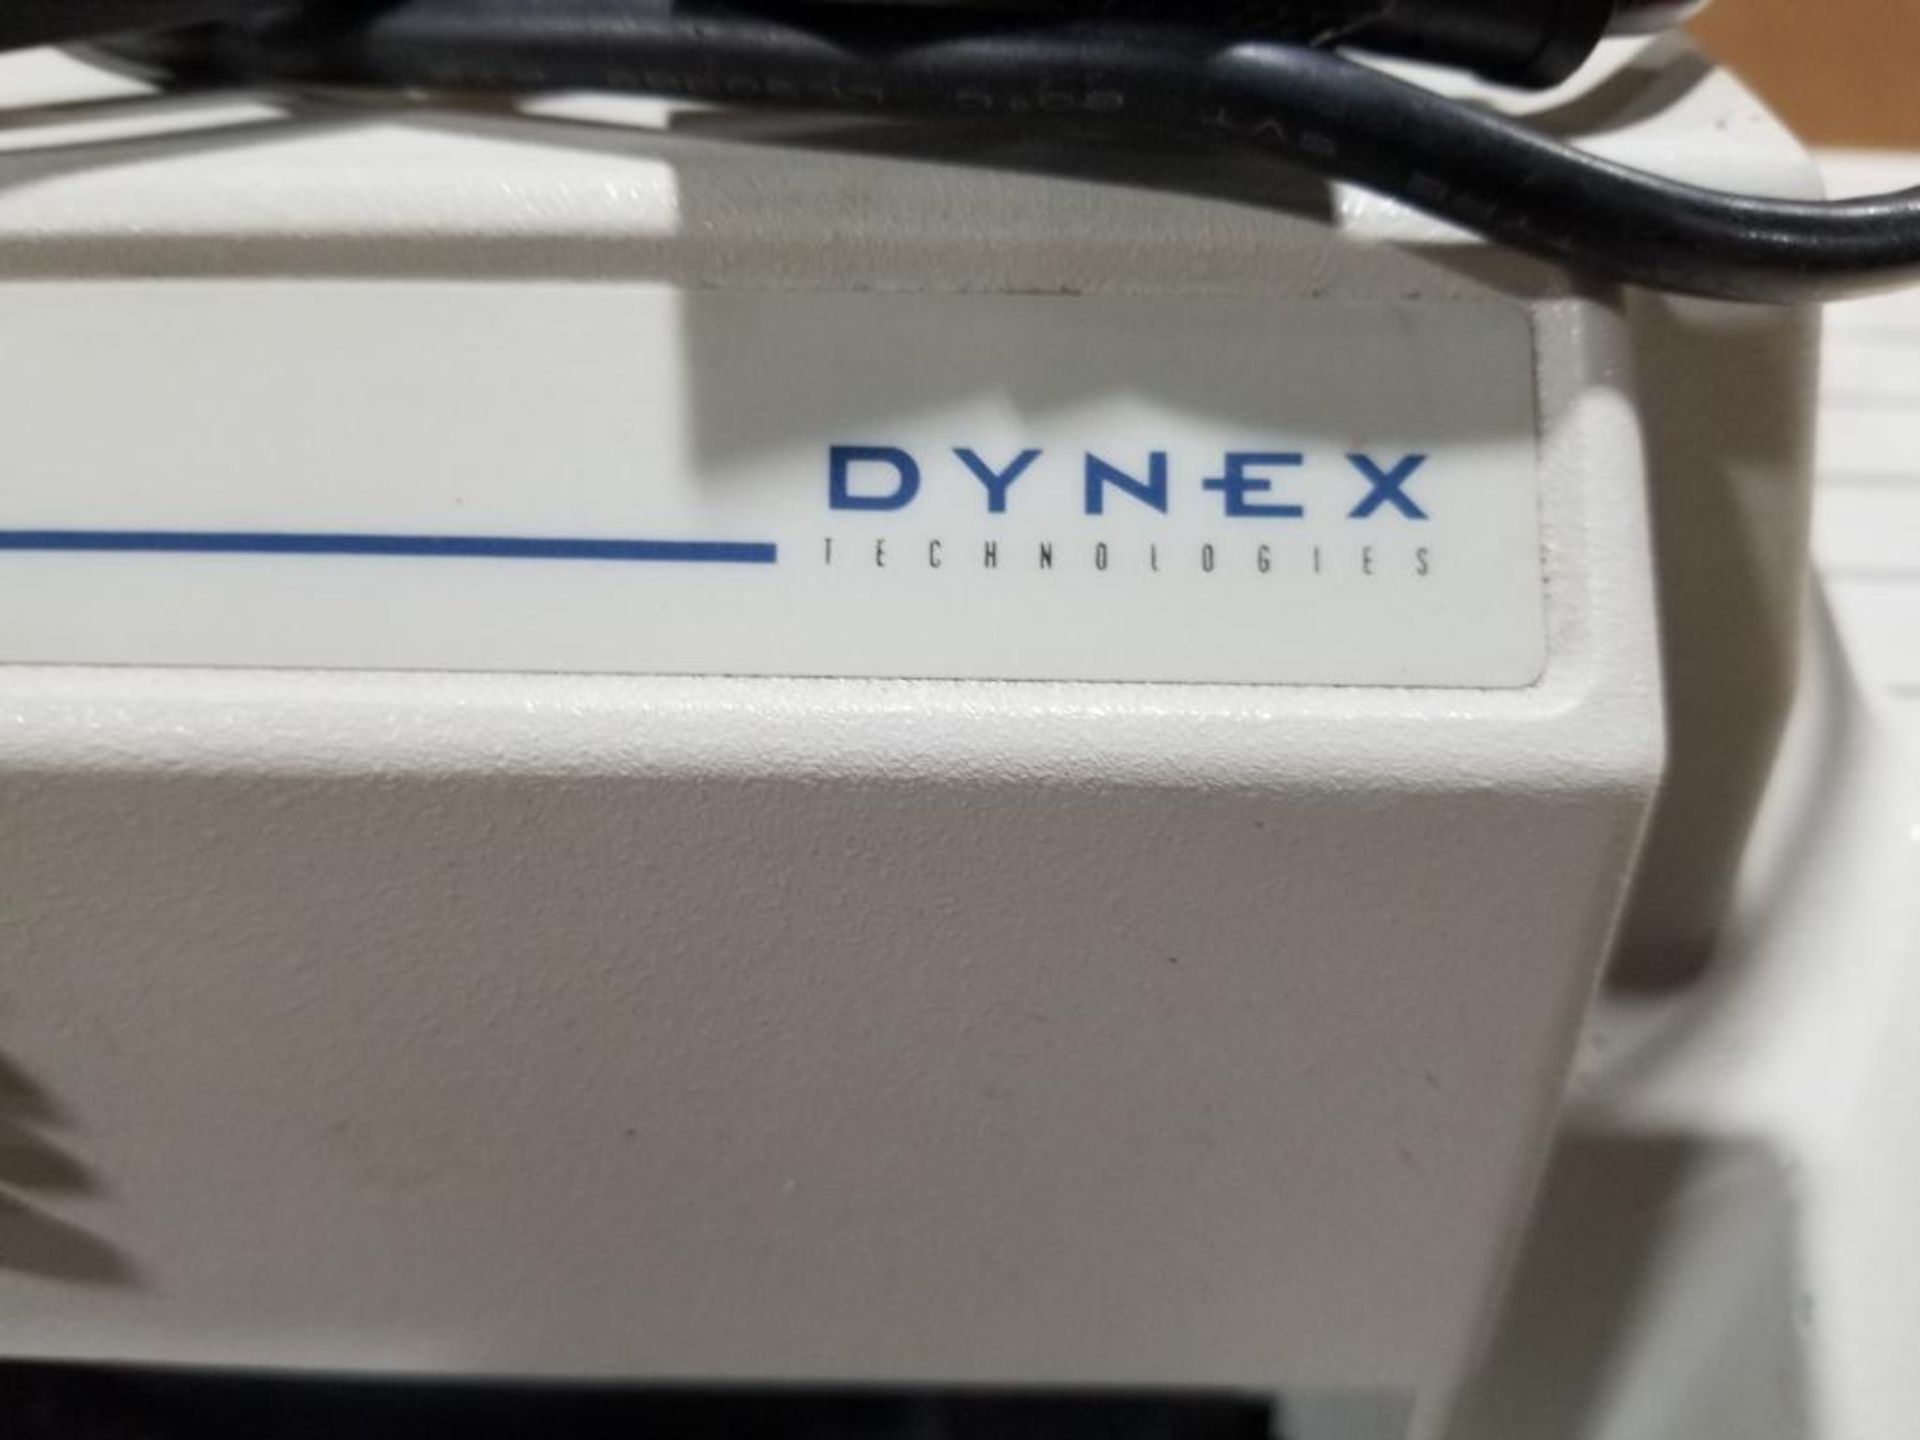 Dynex Opsys MW micro plate washer. - Image 4 of 8